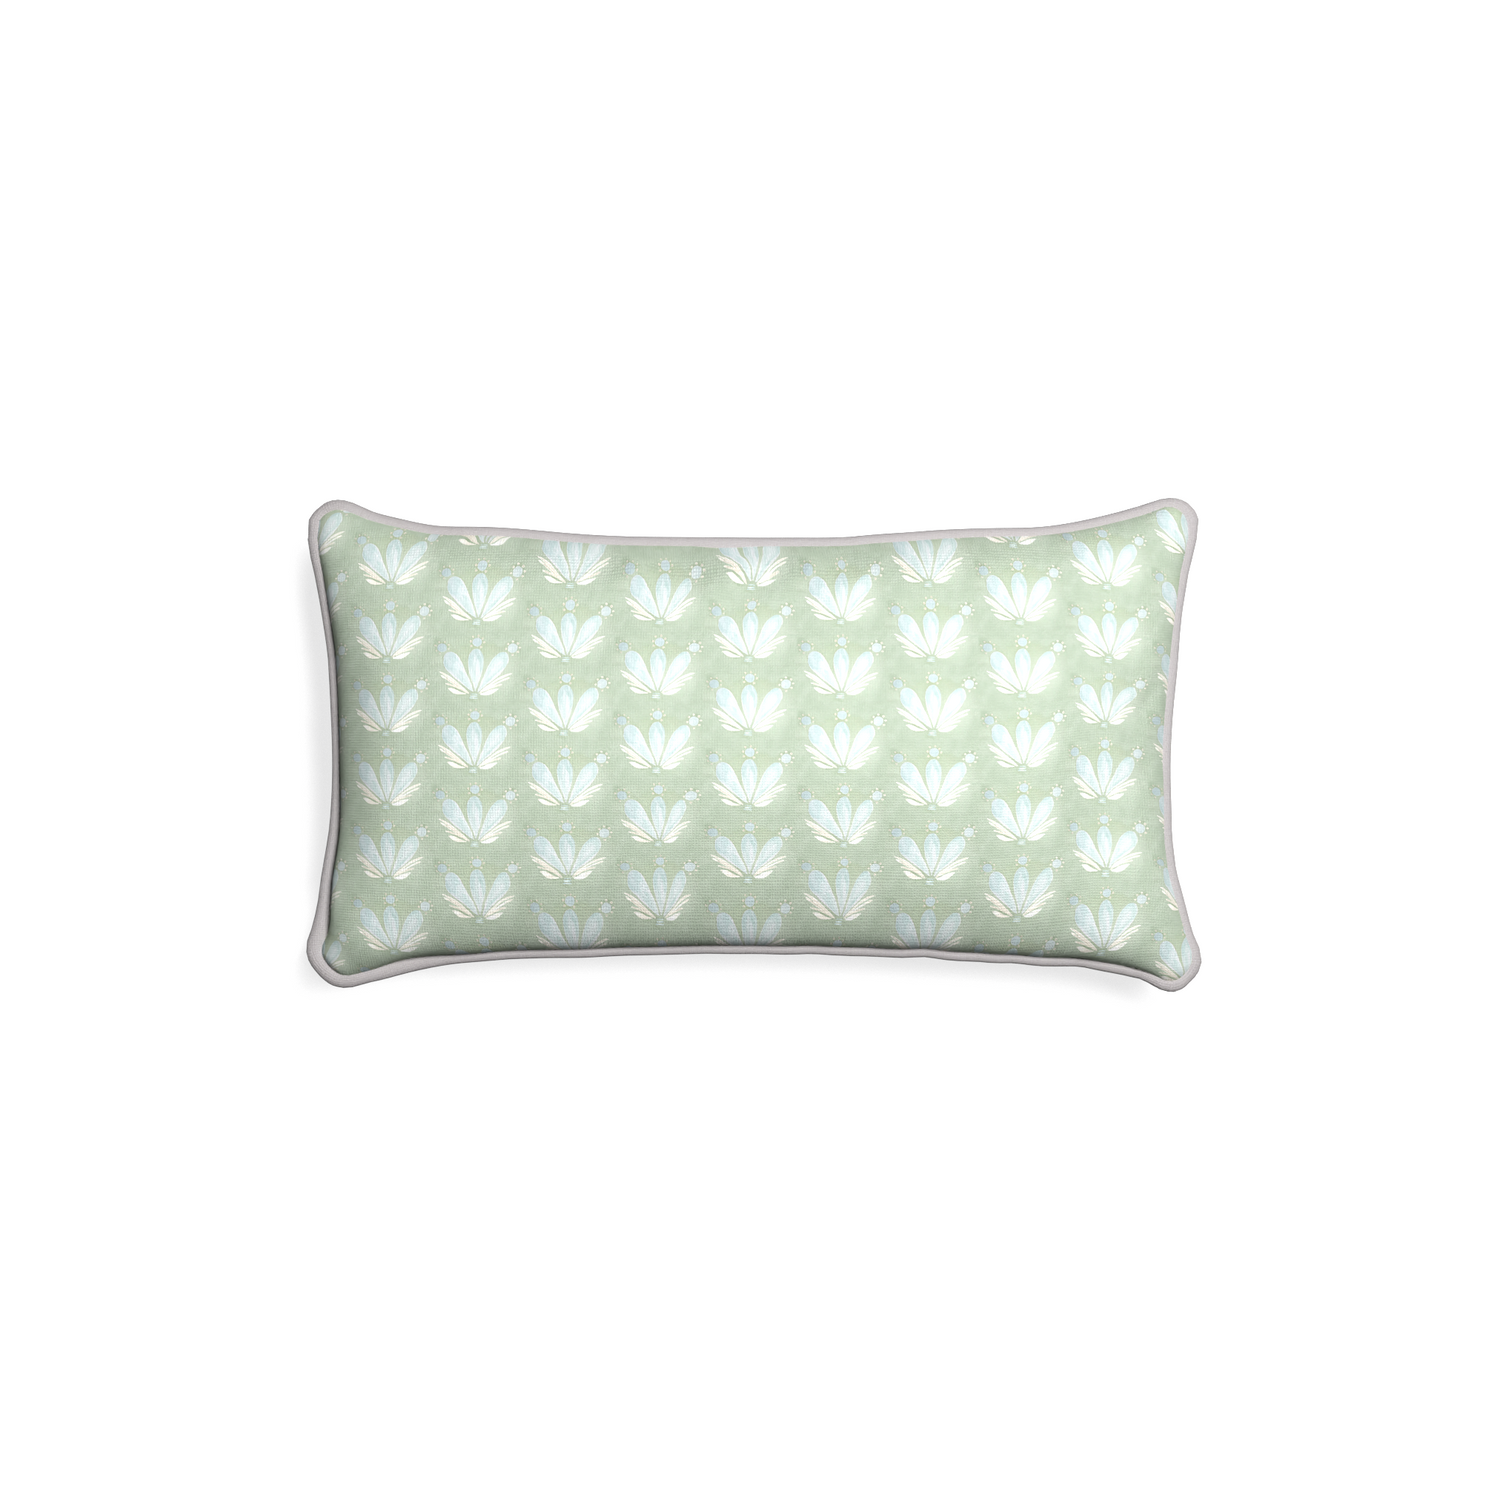 Petite-lumbar serena sea salt custom blue & green floral drop repeatpillow with pebble piping on white background